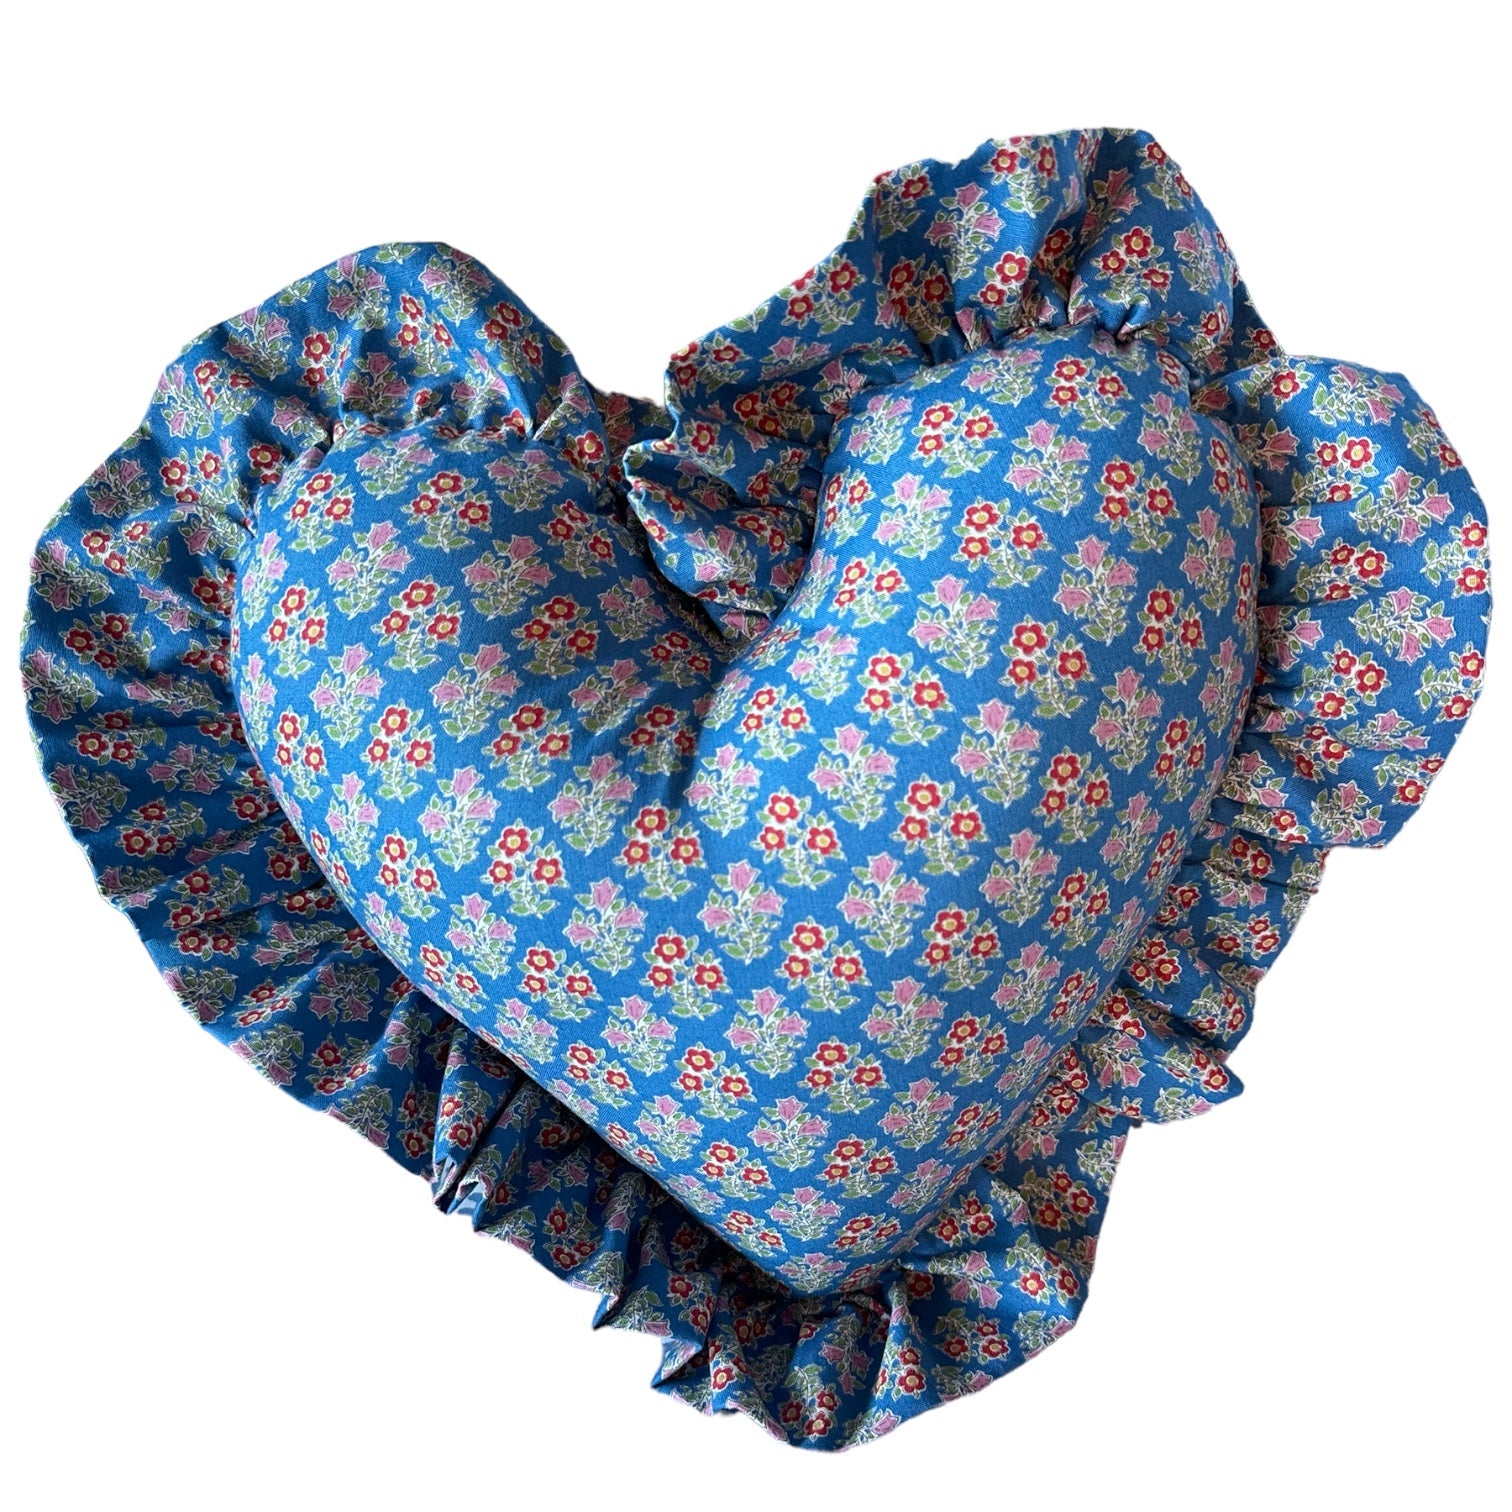 Heart Ruffle Pillow - blue print - Premium  from Tricia Lowenfield Design 